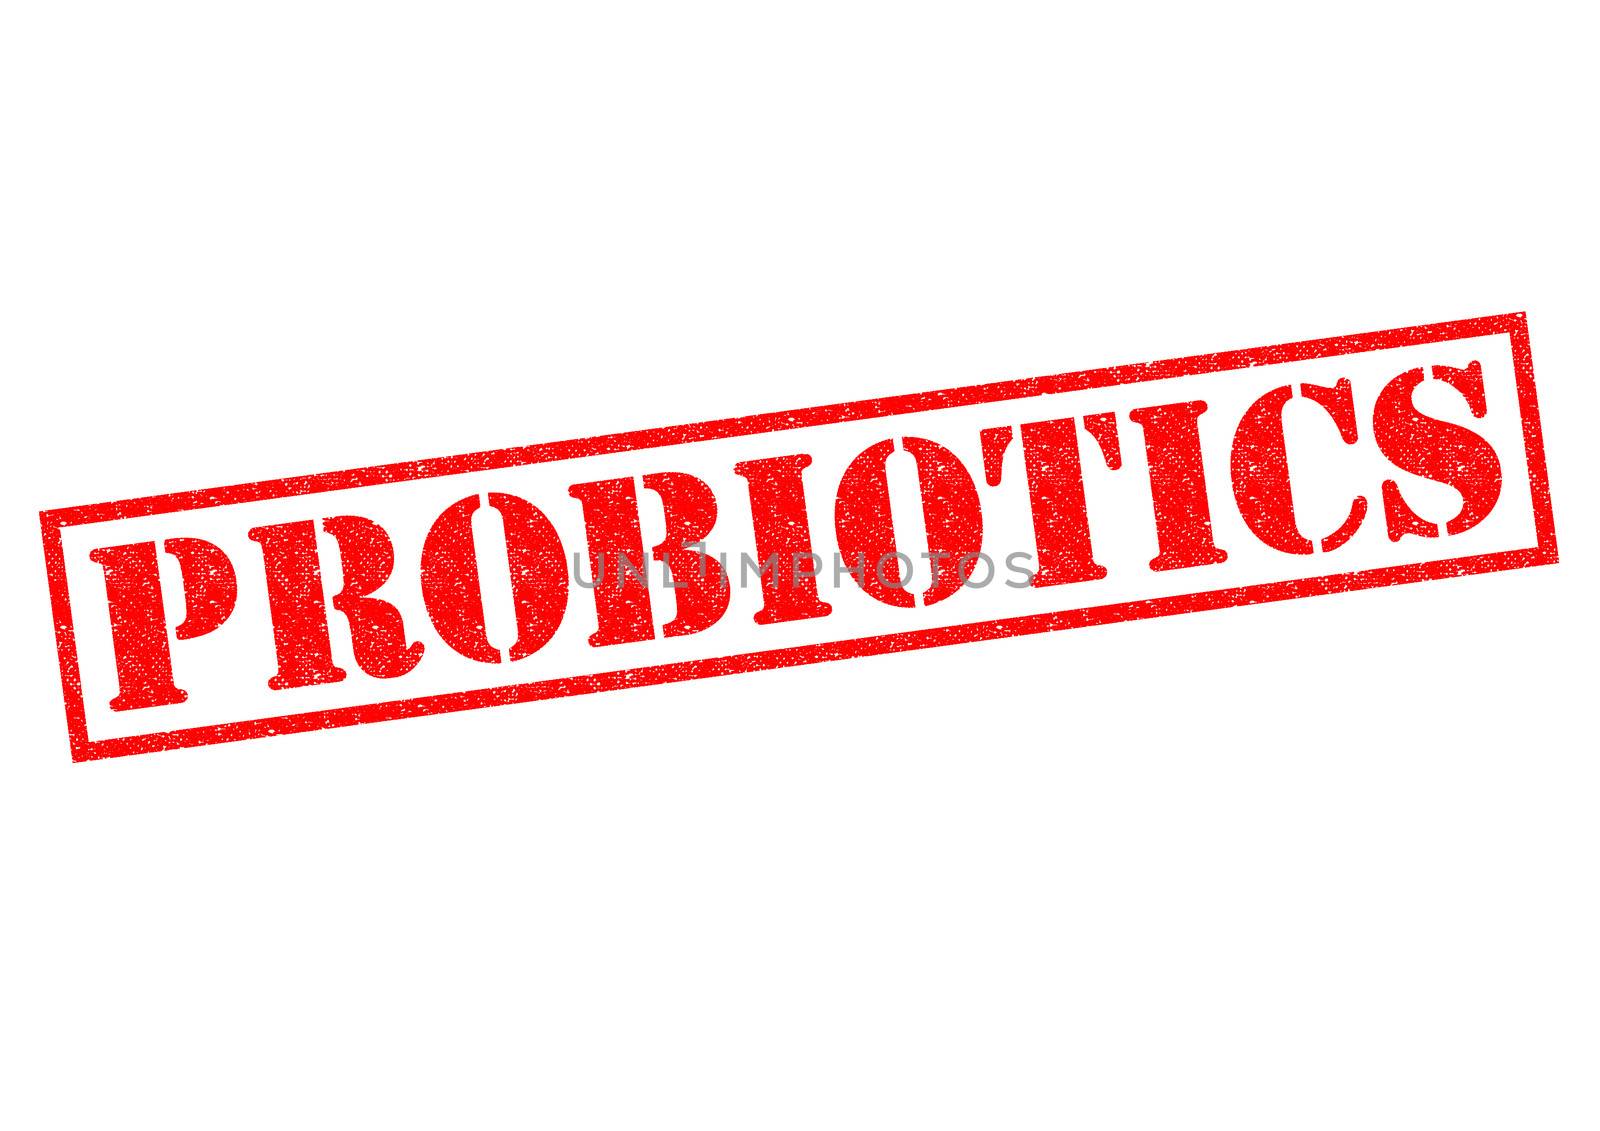 PROBIOTICS red Rubber Stamp over a white background.